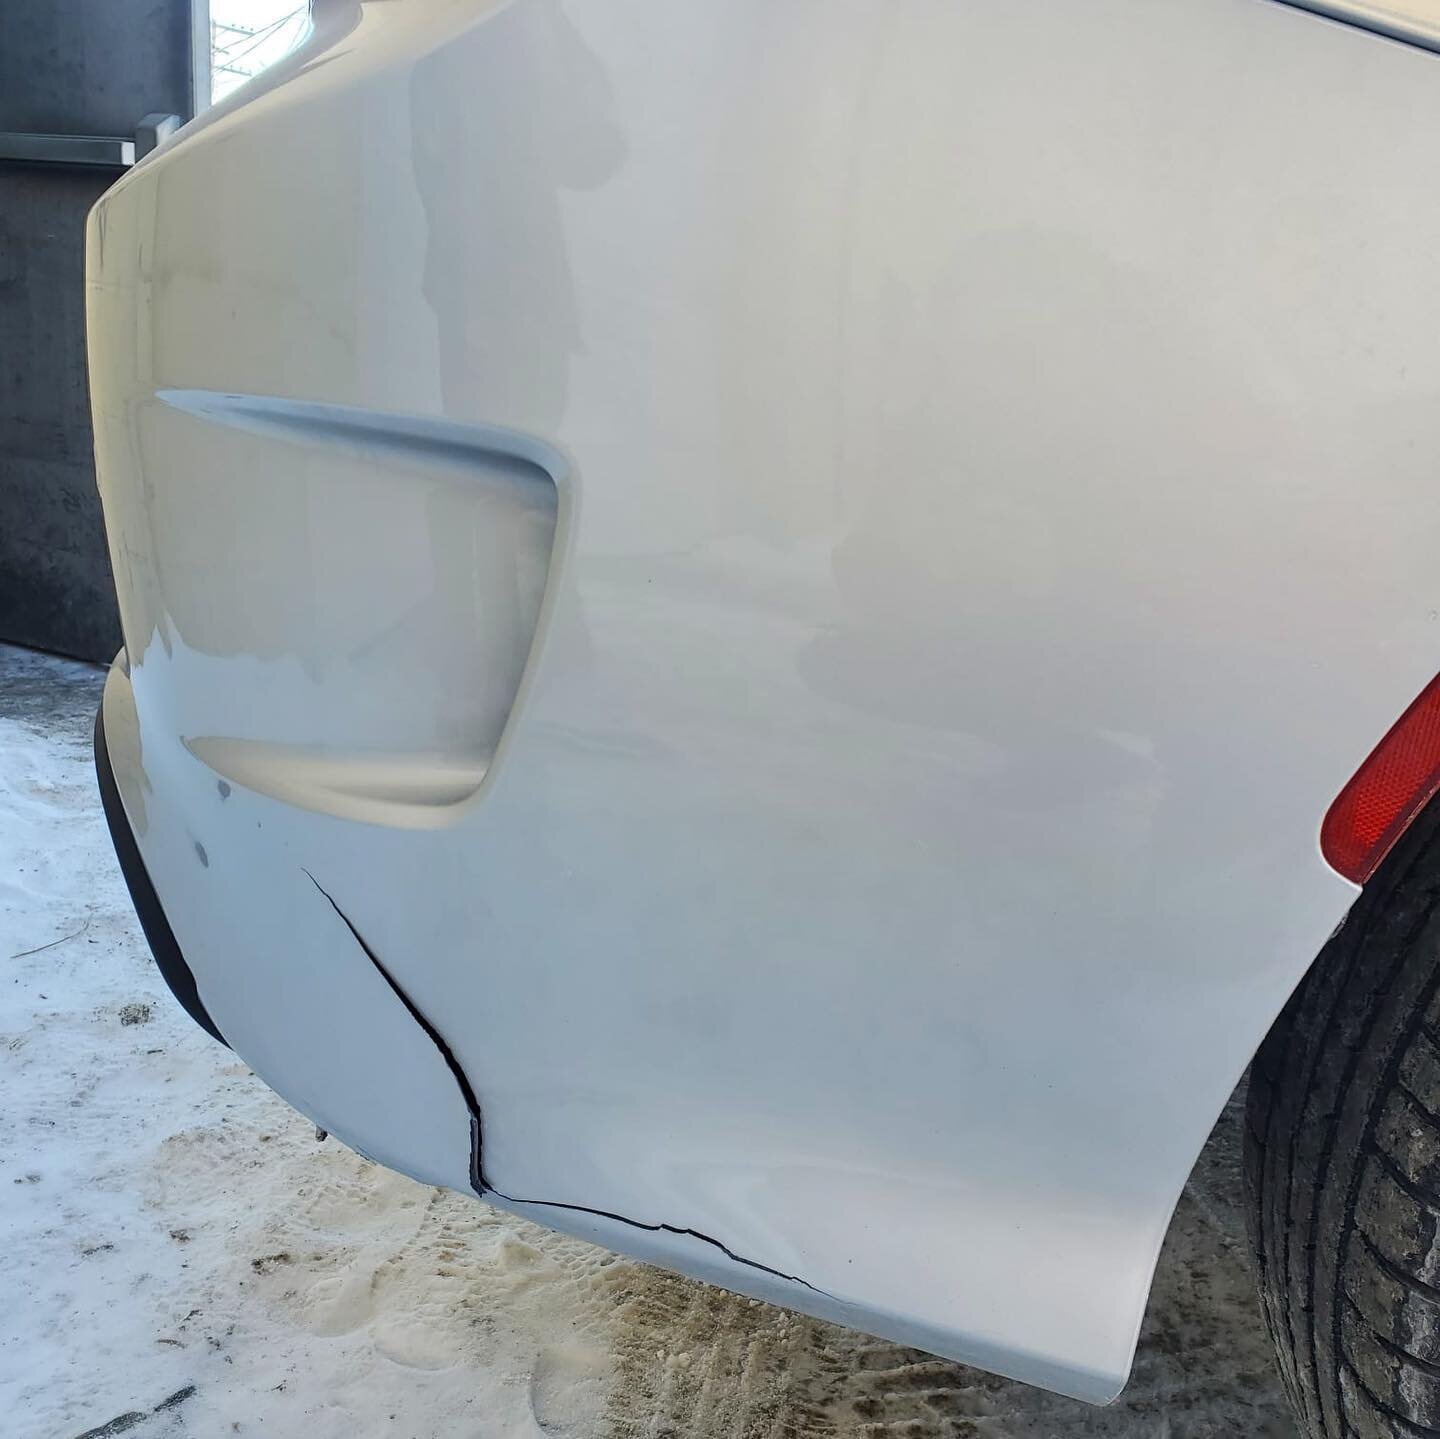 Option A (MPI)
- replace entire lower bumper &amp; repaint new bumper hoping to match paint color 
$ 1,200.00 
MPI deductible
**Potential increase in insurance premiums 
Option B (Final Touch Auto Center)
- fix existing bumper and color match paint o